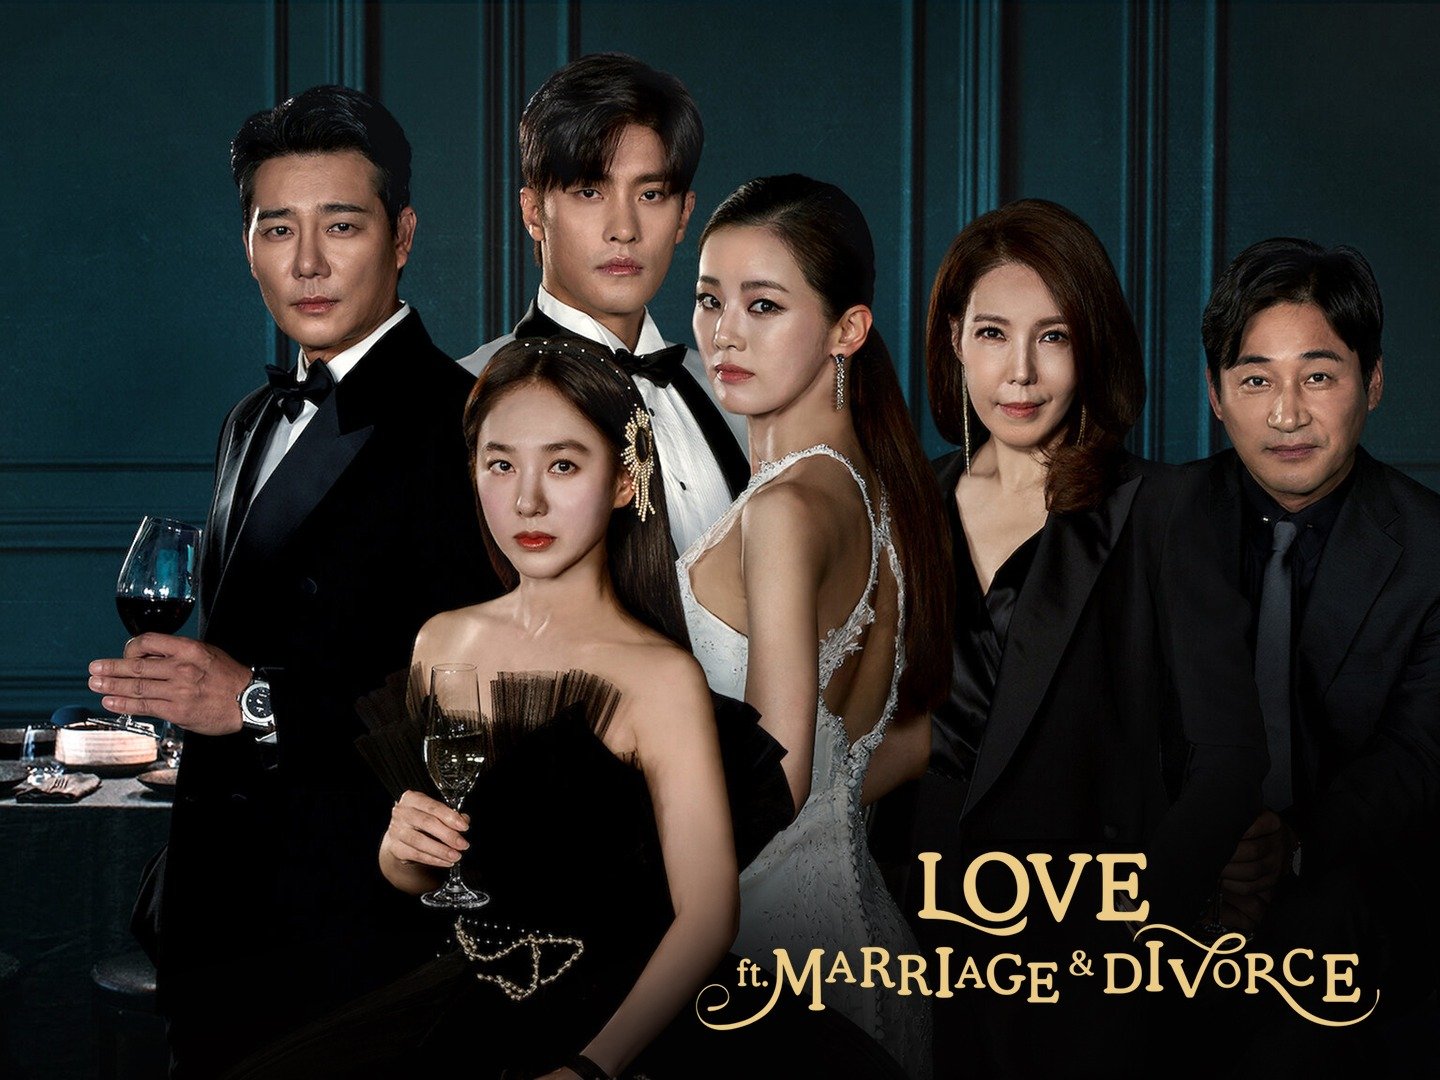 Love ft marriage and divorce season 1